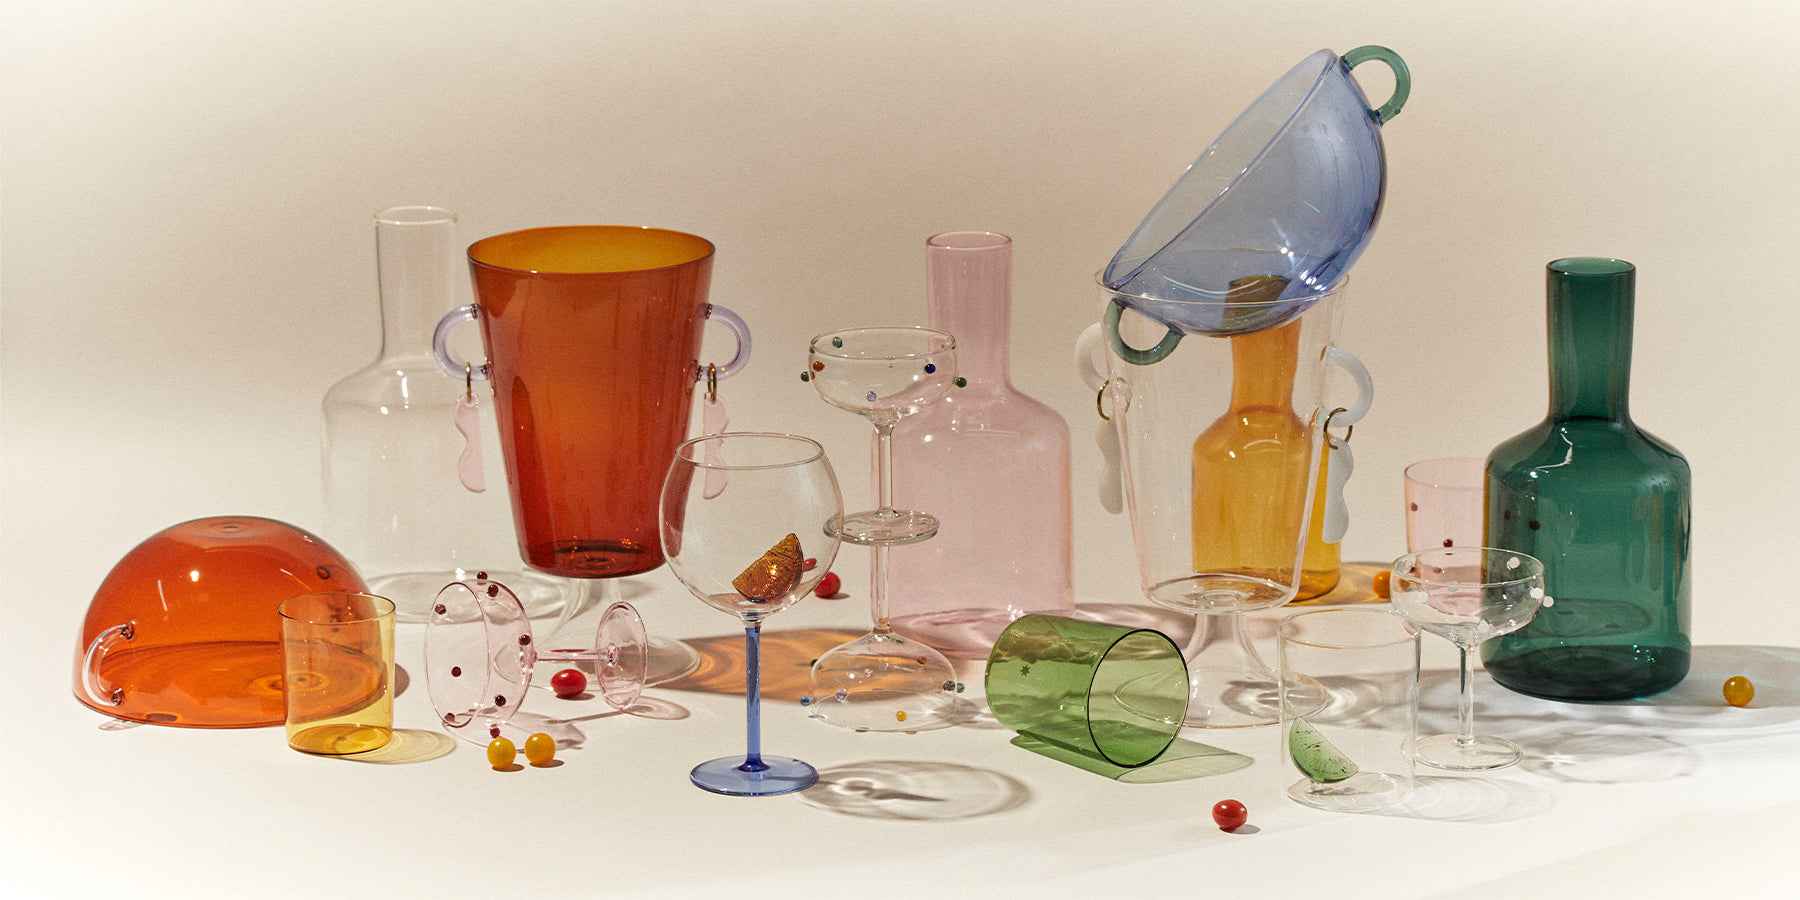 Flower Carafe Other - Home R95071